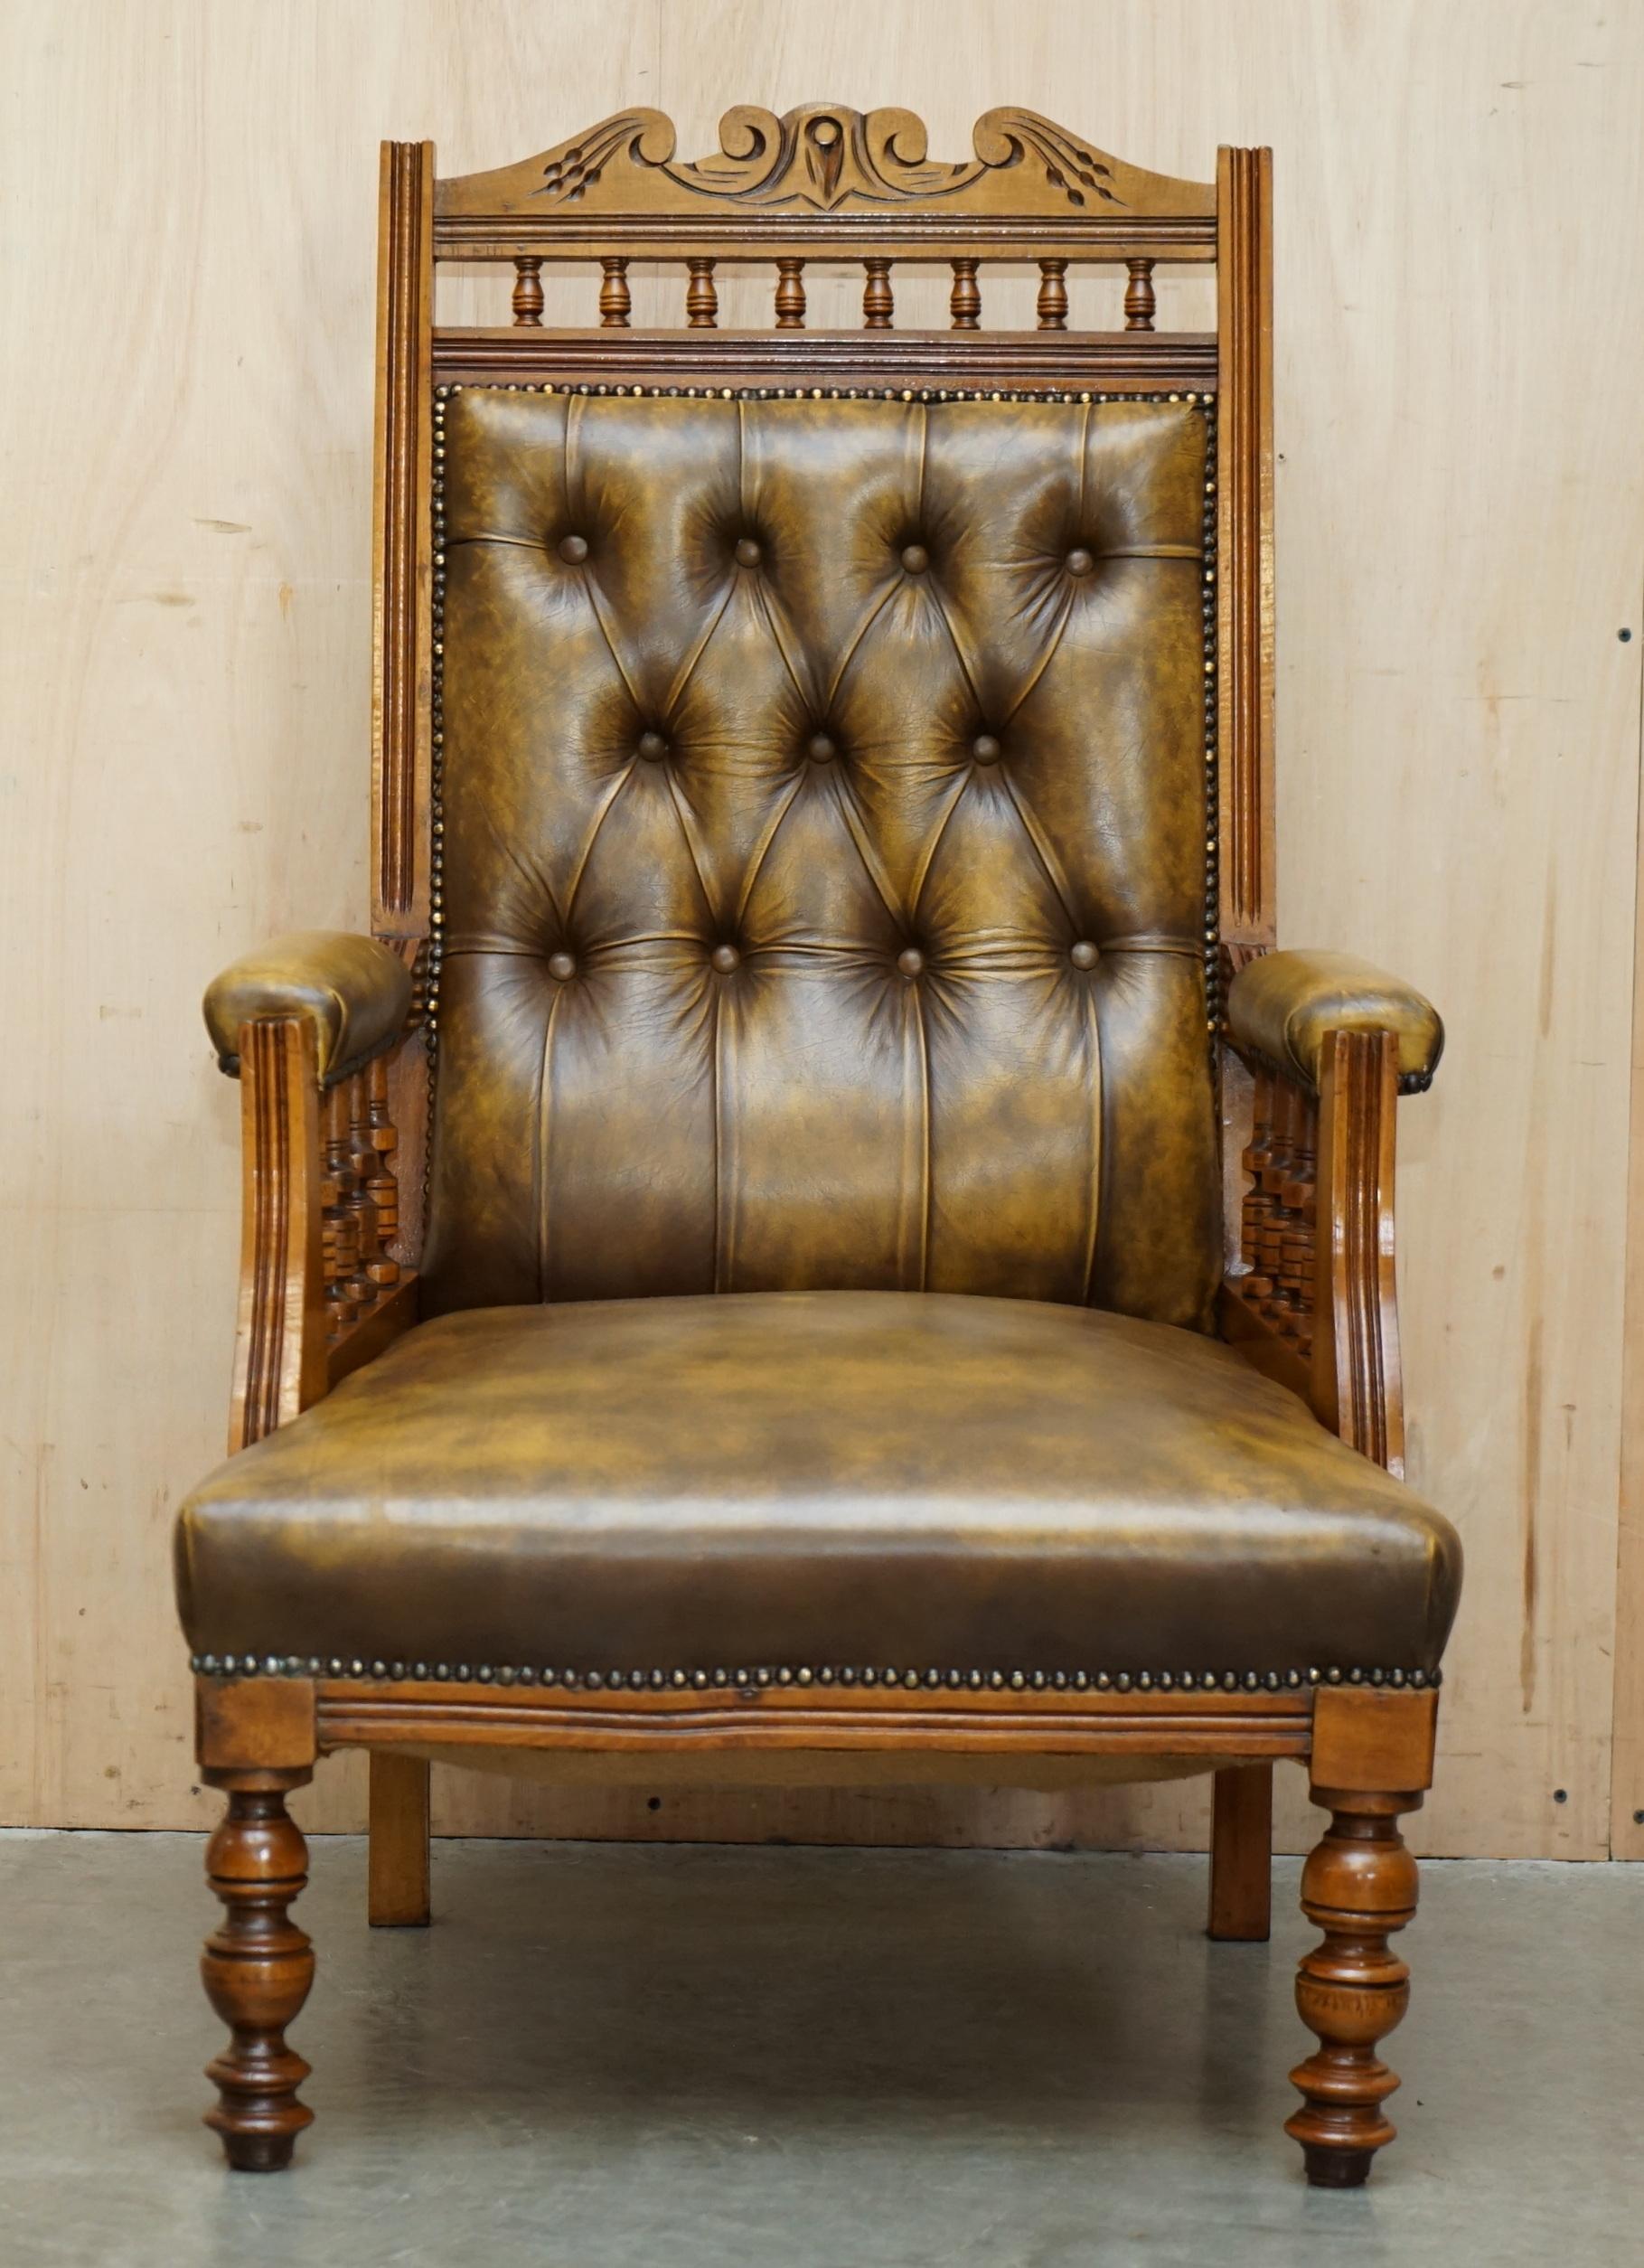 Royal House Antiques

Royal House Antiques is delighted to offer for sale this very comfortable and decorative vintage Chesterfield hand tufted library reading armchair in petrol brown leather upholstery 

Please note the delivery fee listed is just